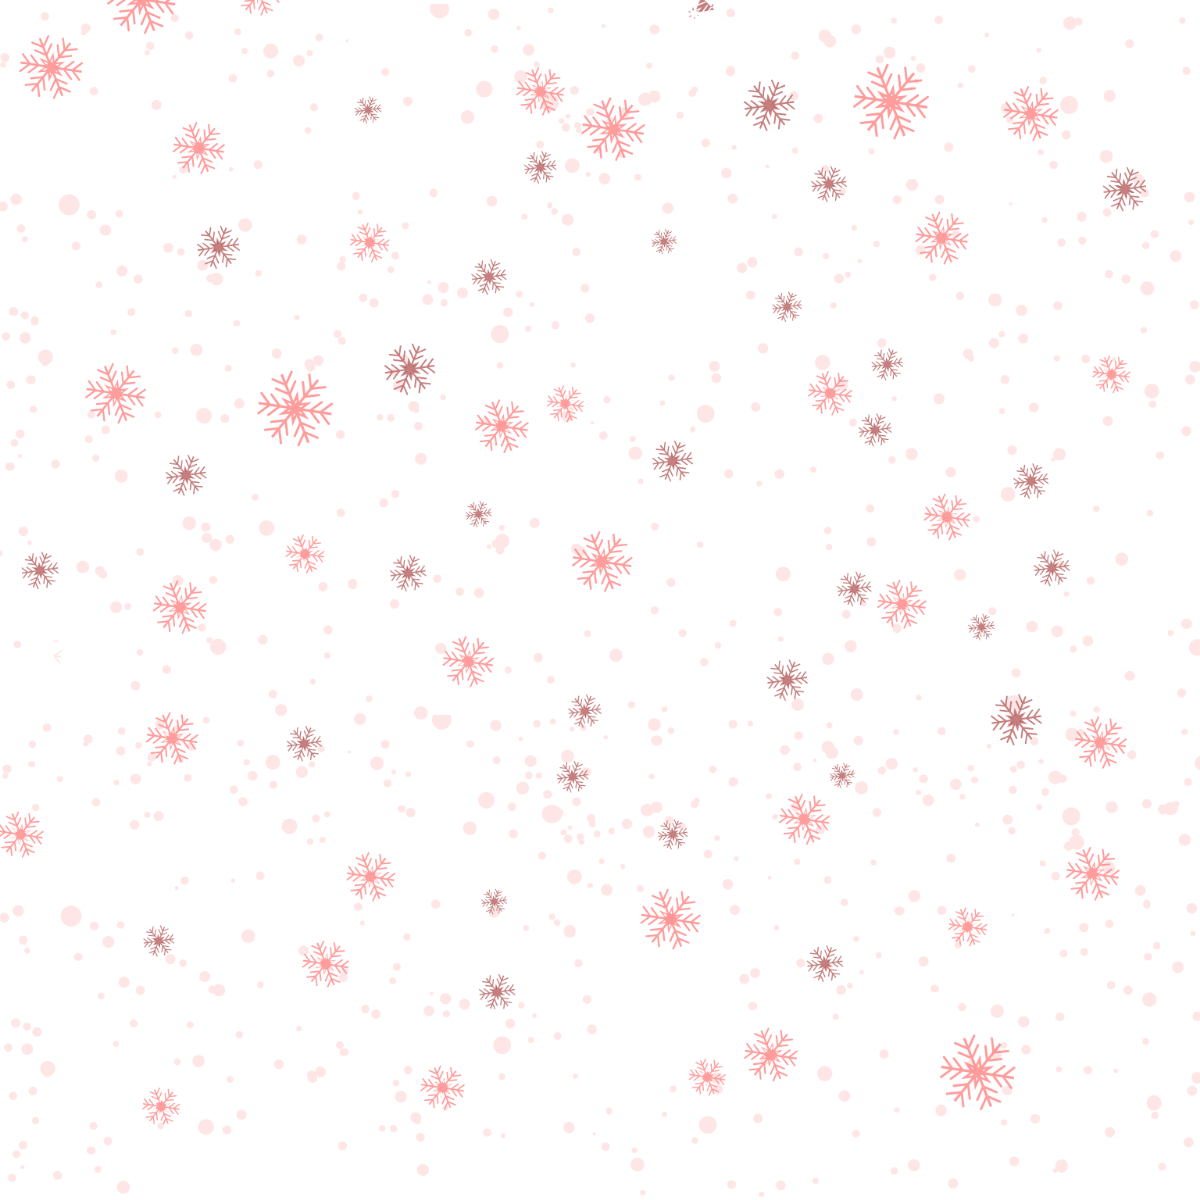 Falling Snowflakes Vector Template